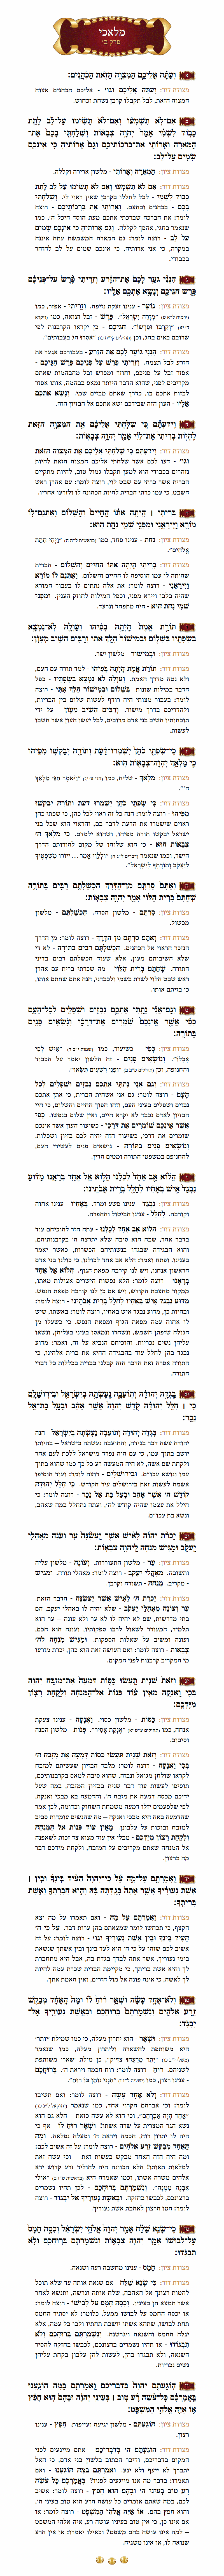 Sefer Malachi Chapter 2 with commentary